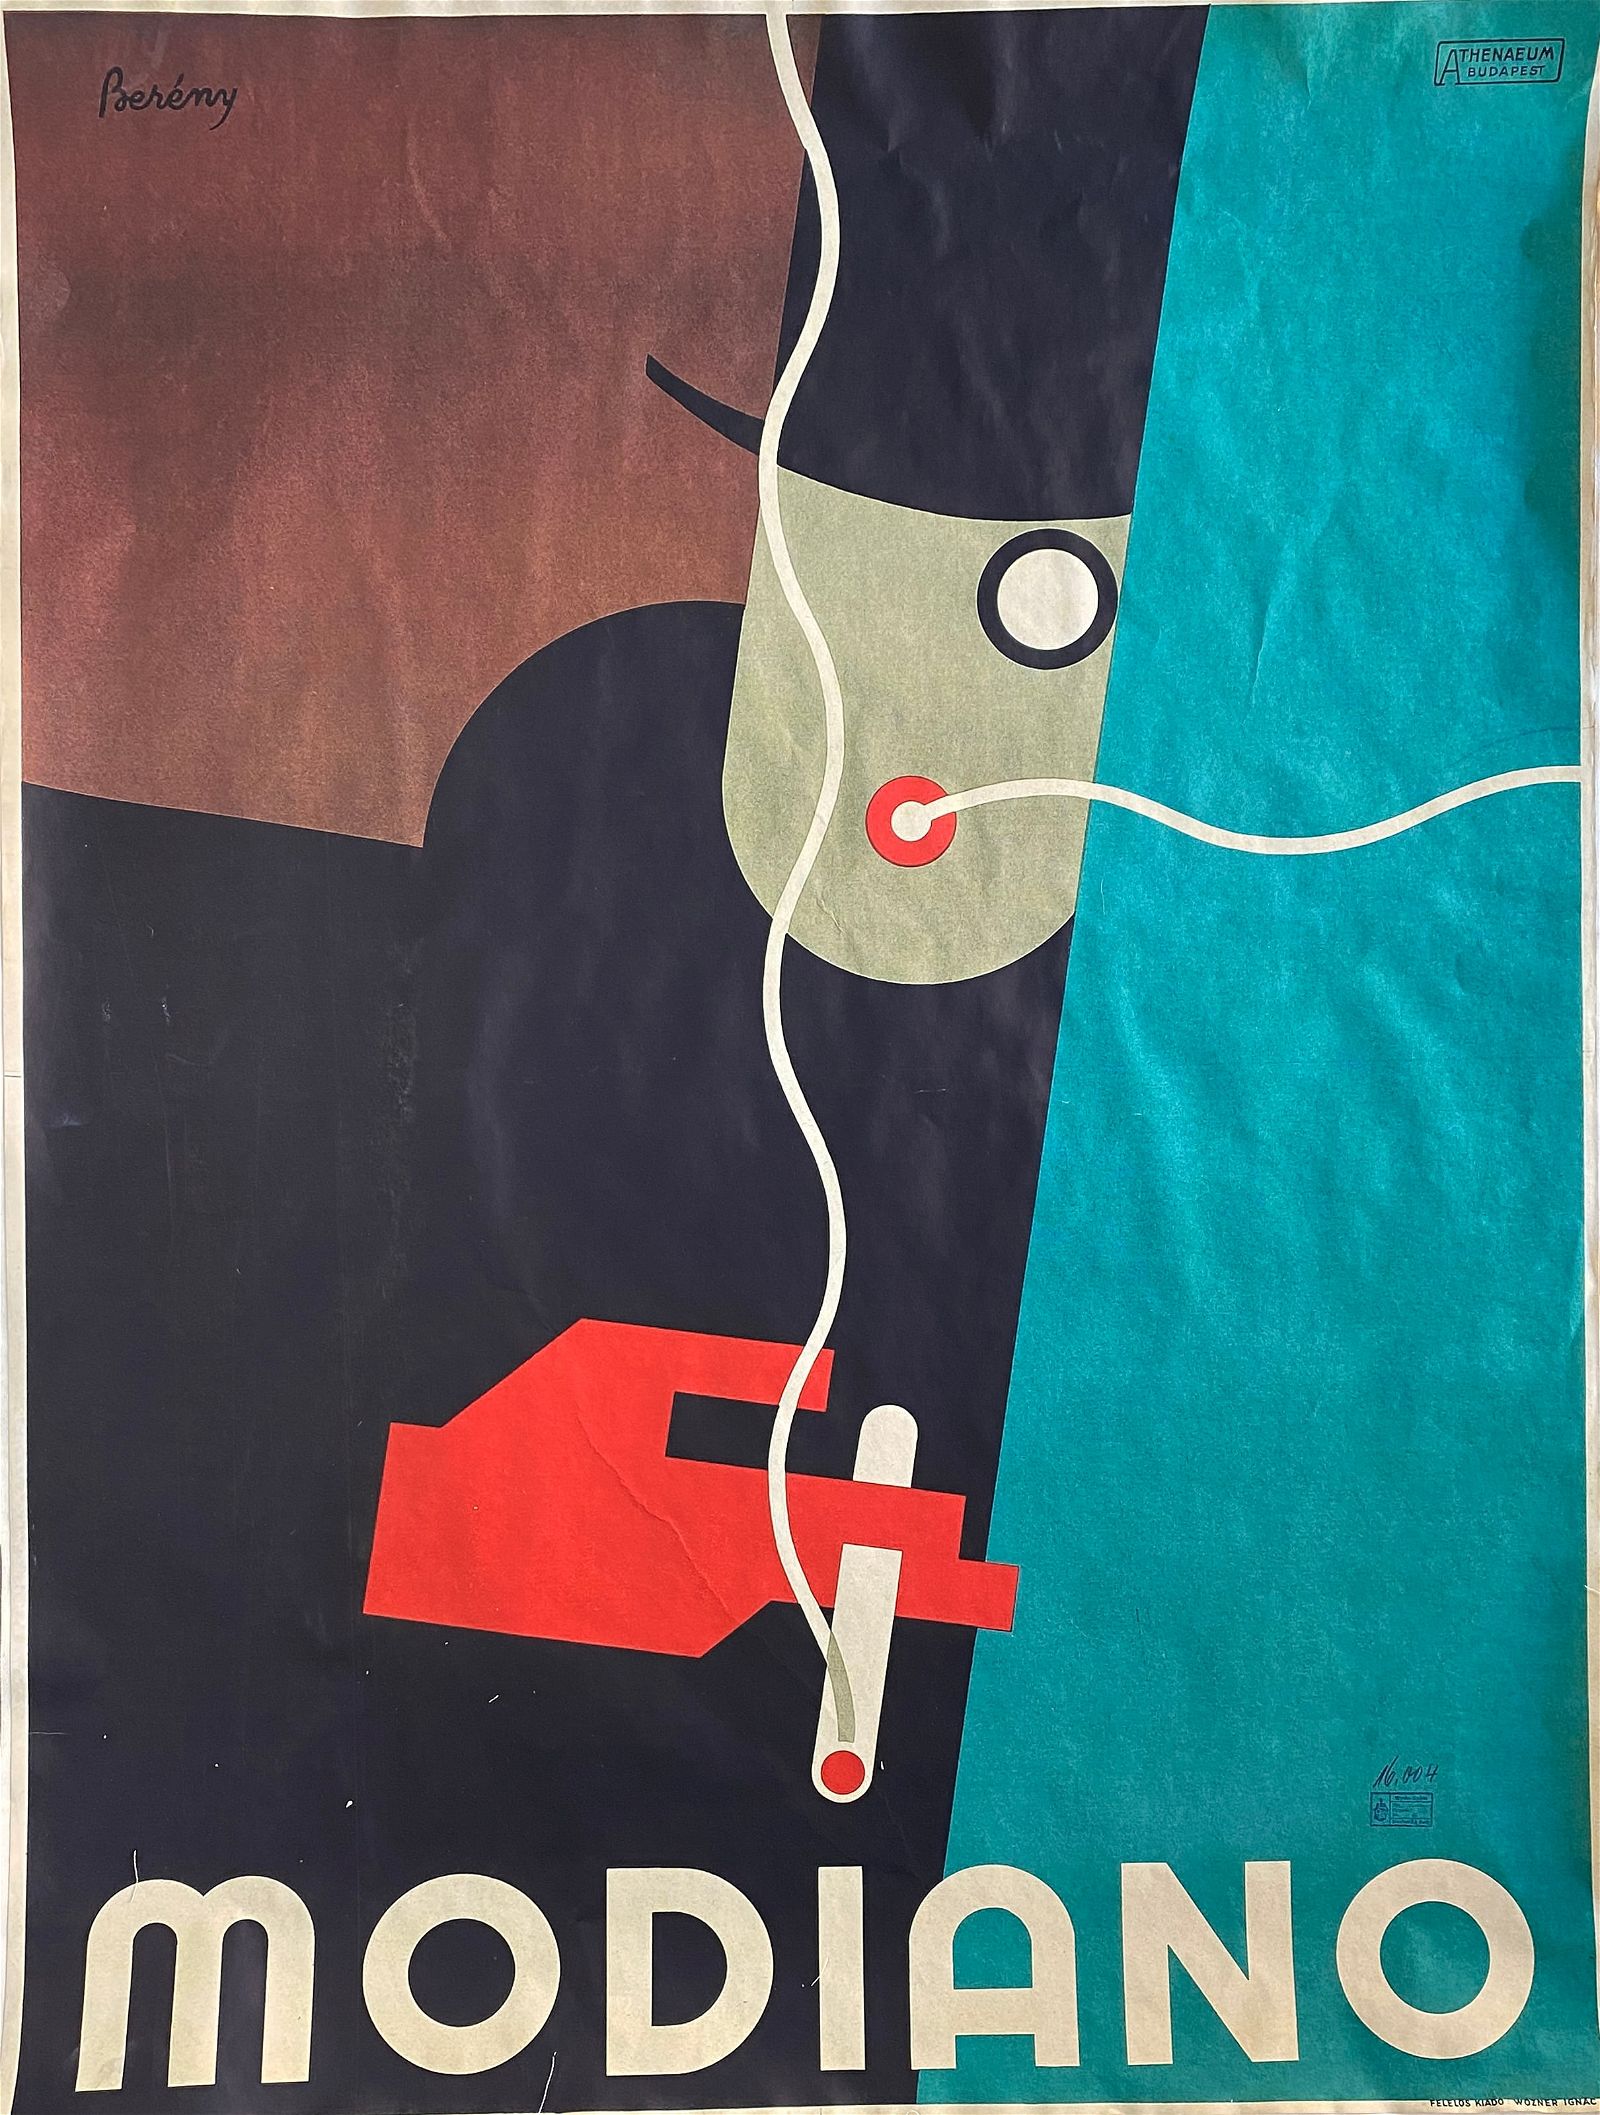 Robert Bereny Modiano Cigarettes poster leads our five auction highlights